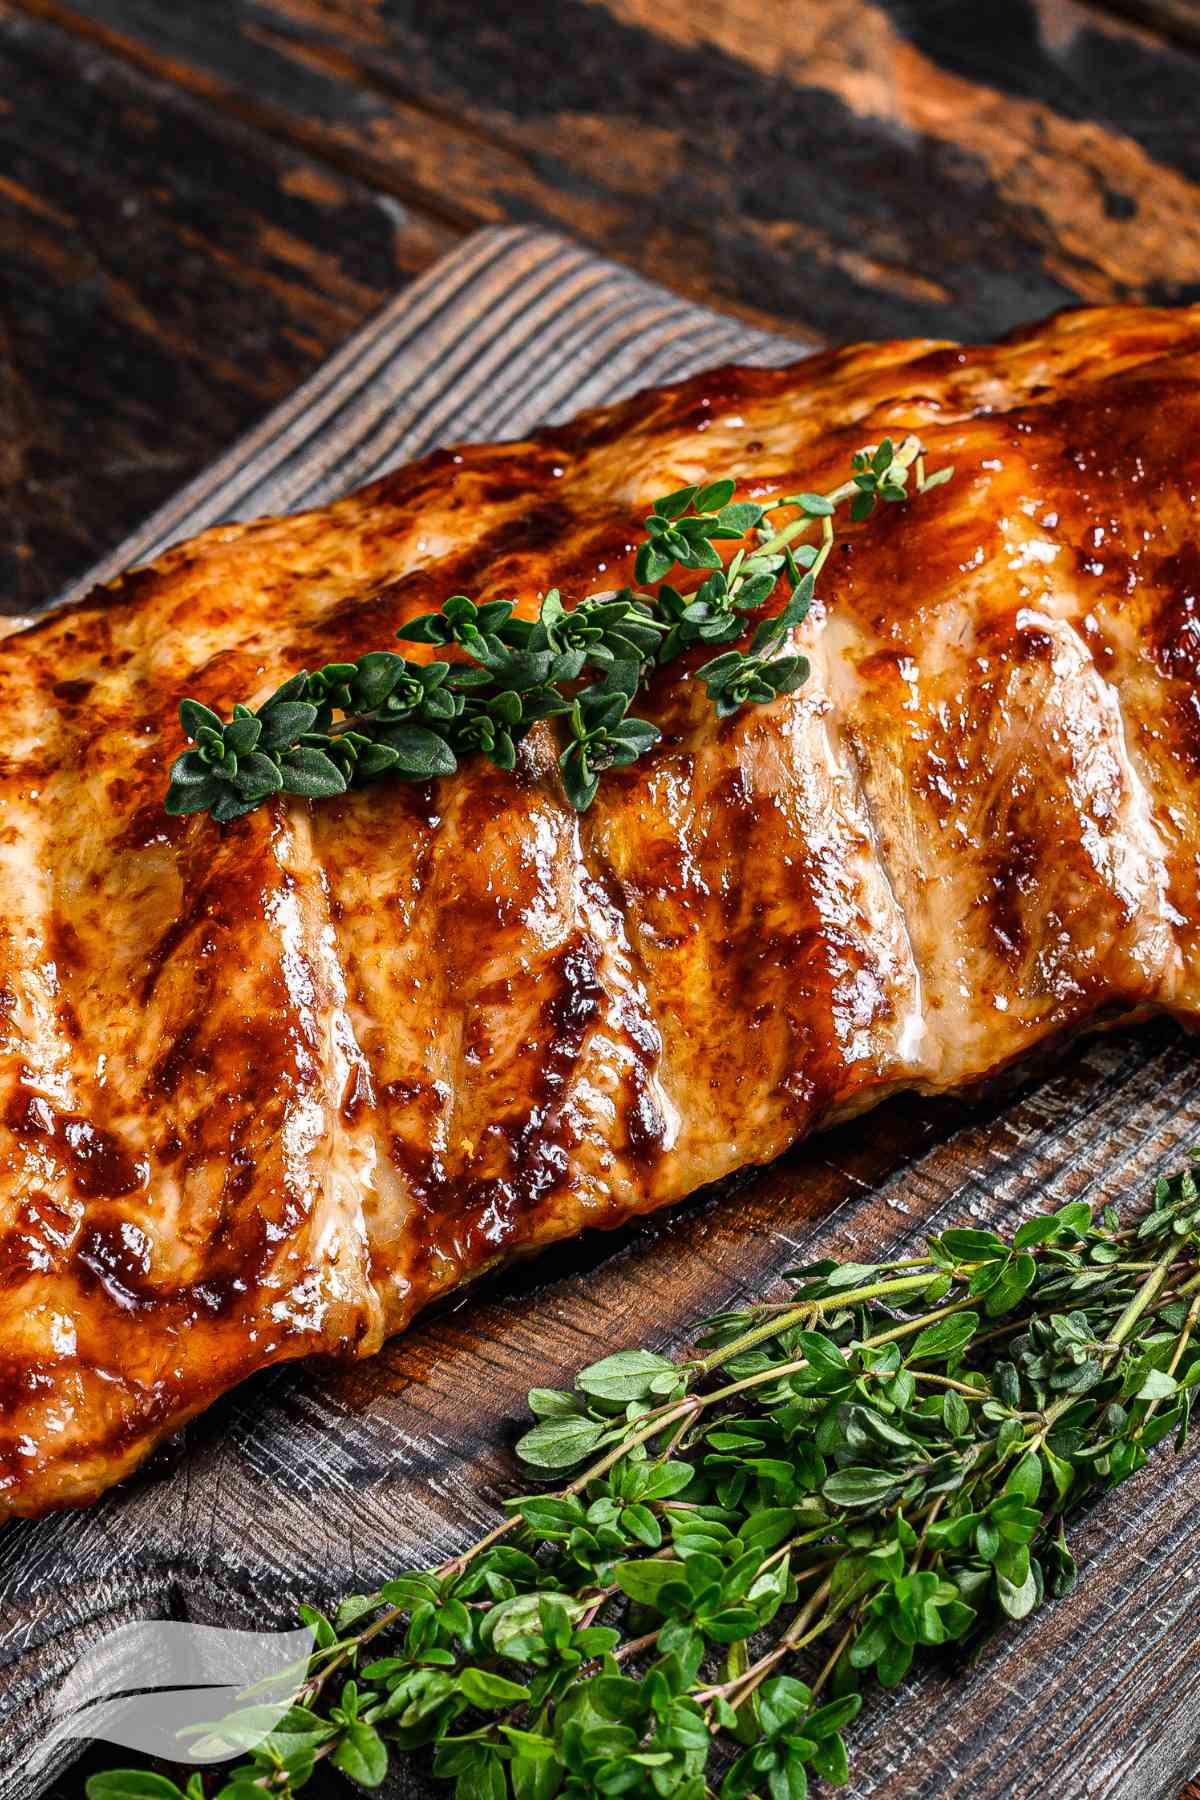 BBQ Ribs on a wooden board with fresh herbs